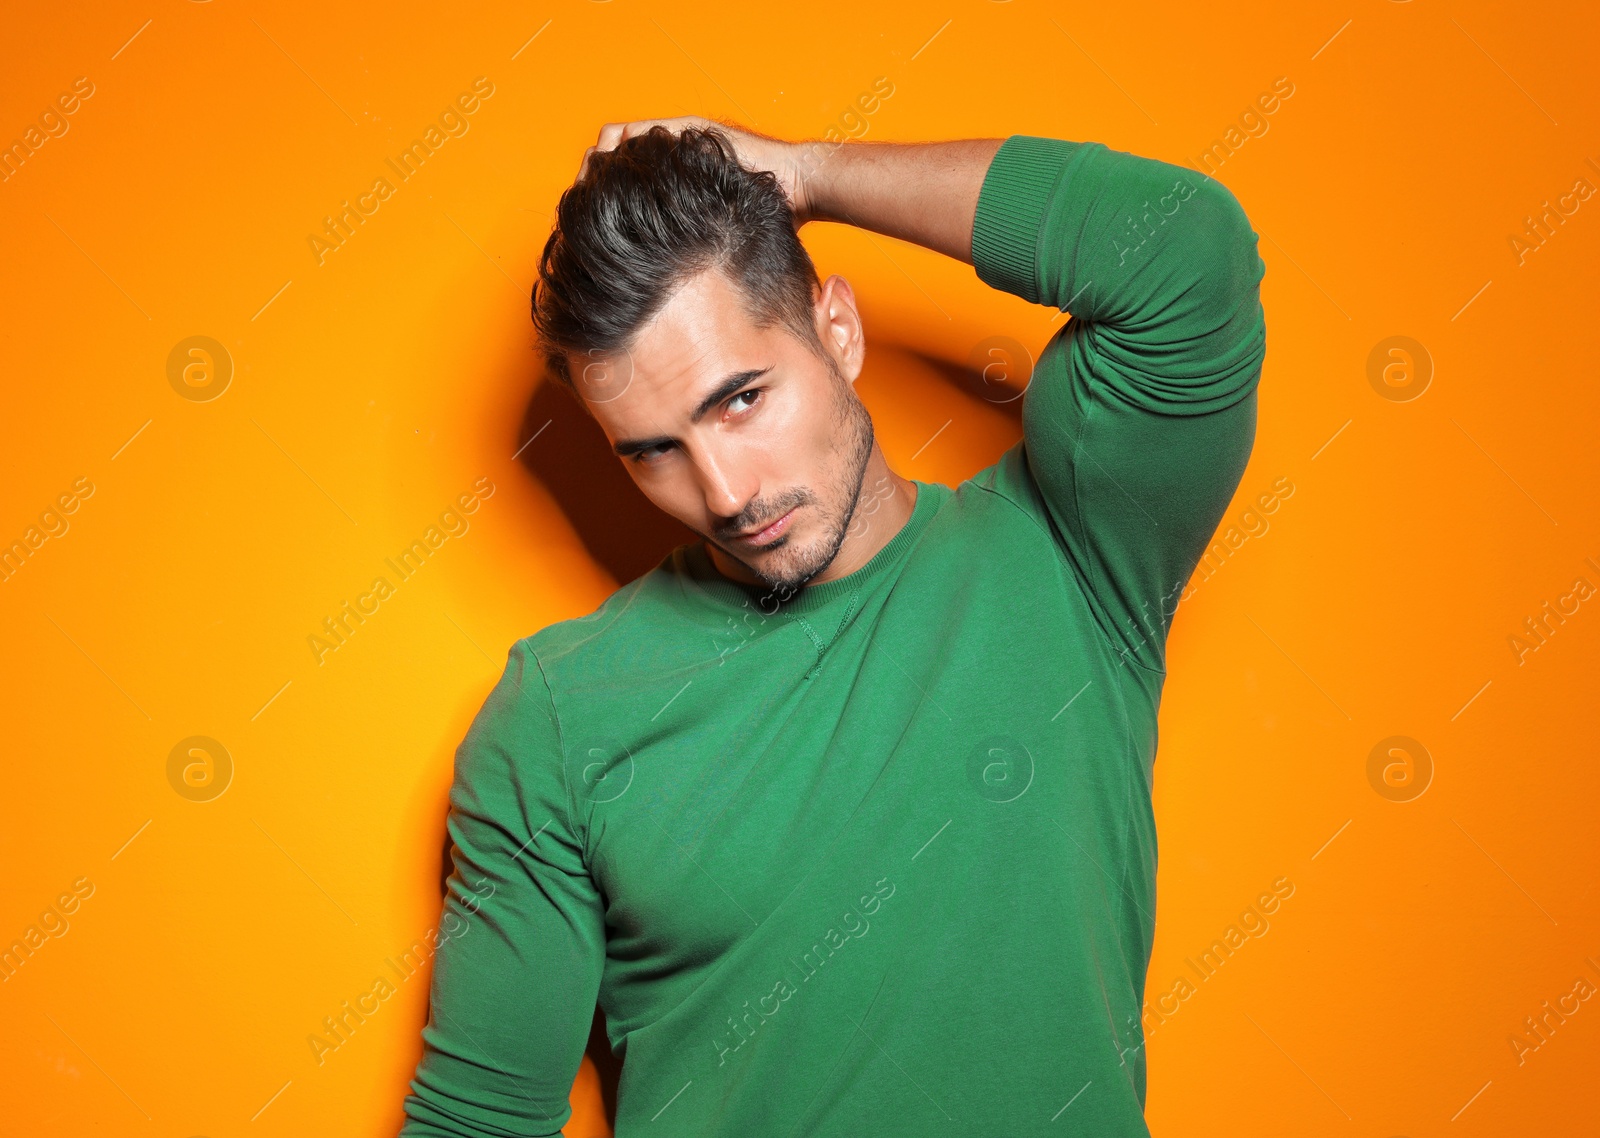 Photo of Young man with trendy hairstyle posing on color background